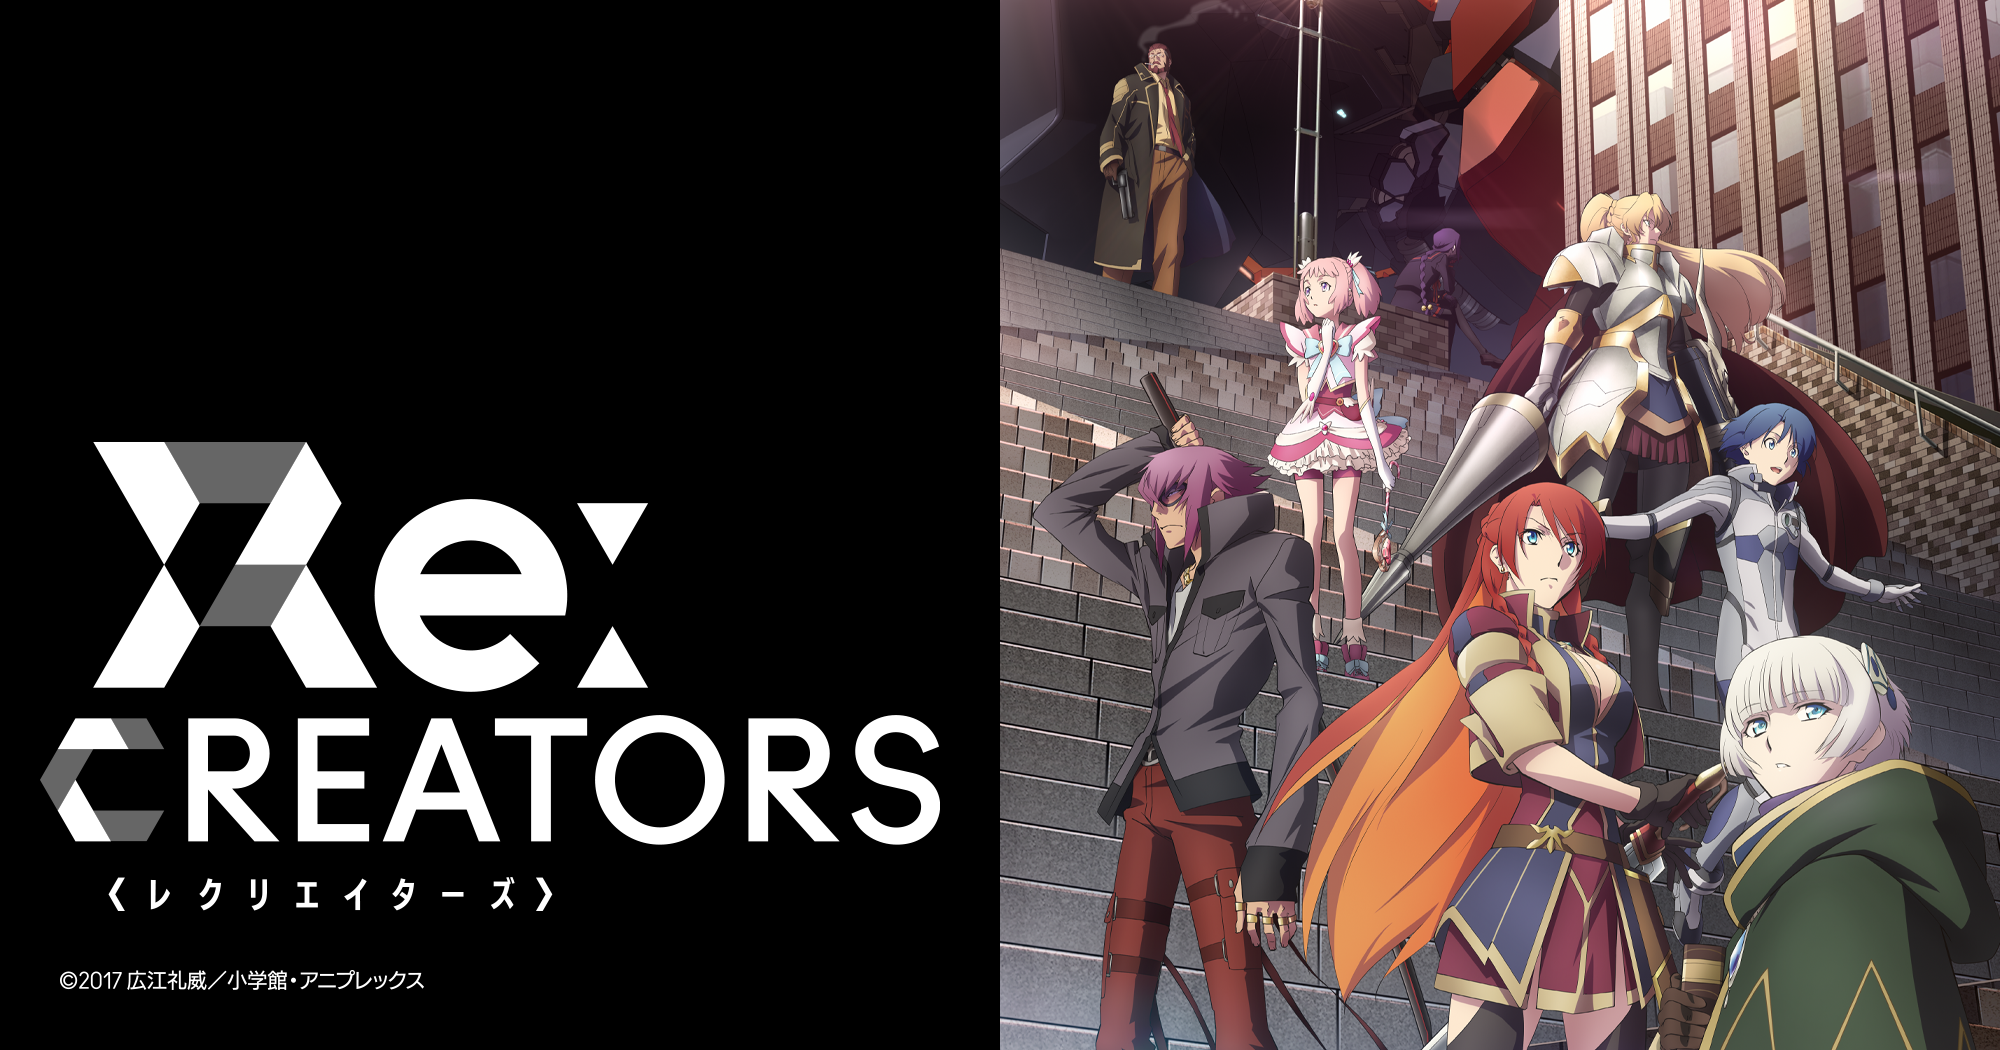 Re Creators Wallpapers Anime Hq Re Creators Pictures 4k Wallpapers 19